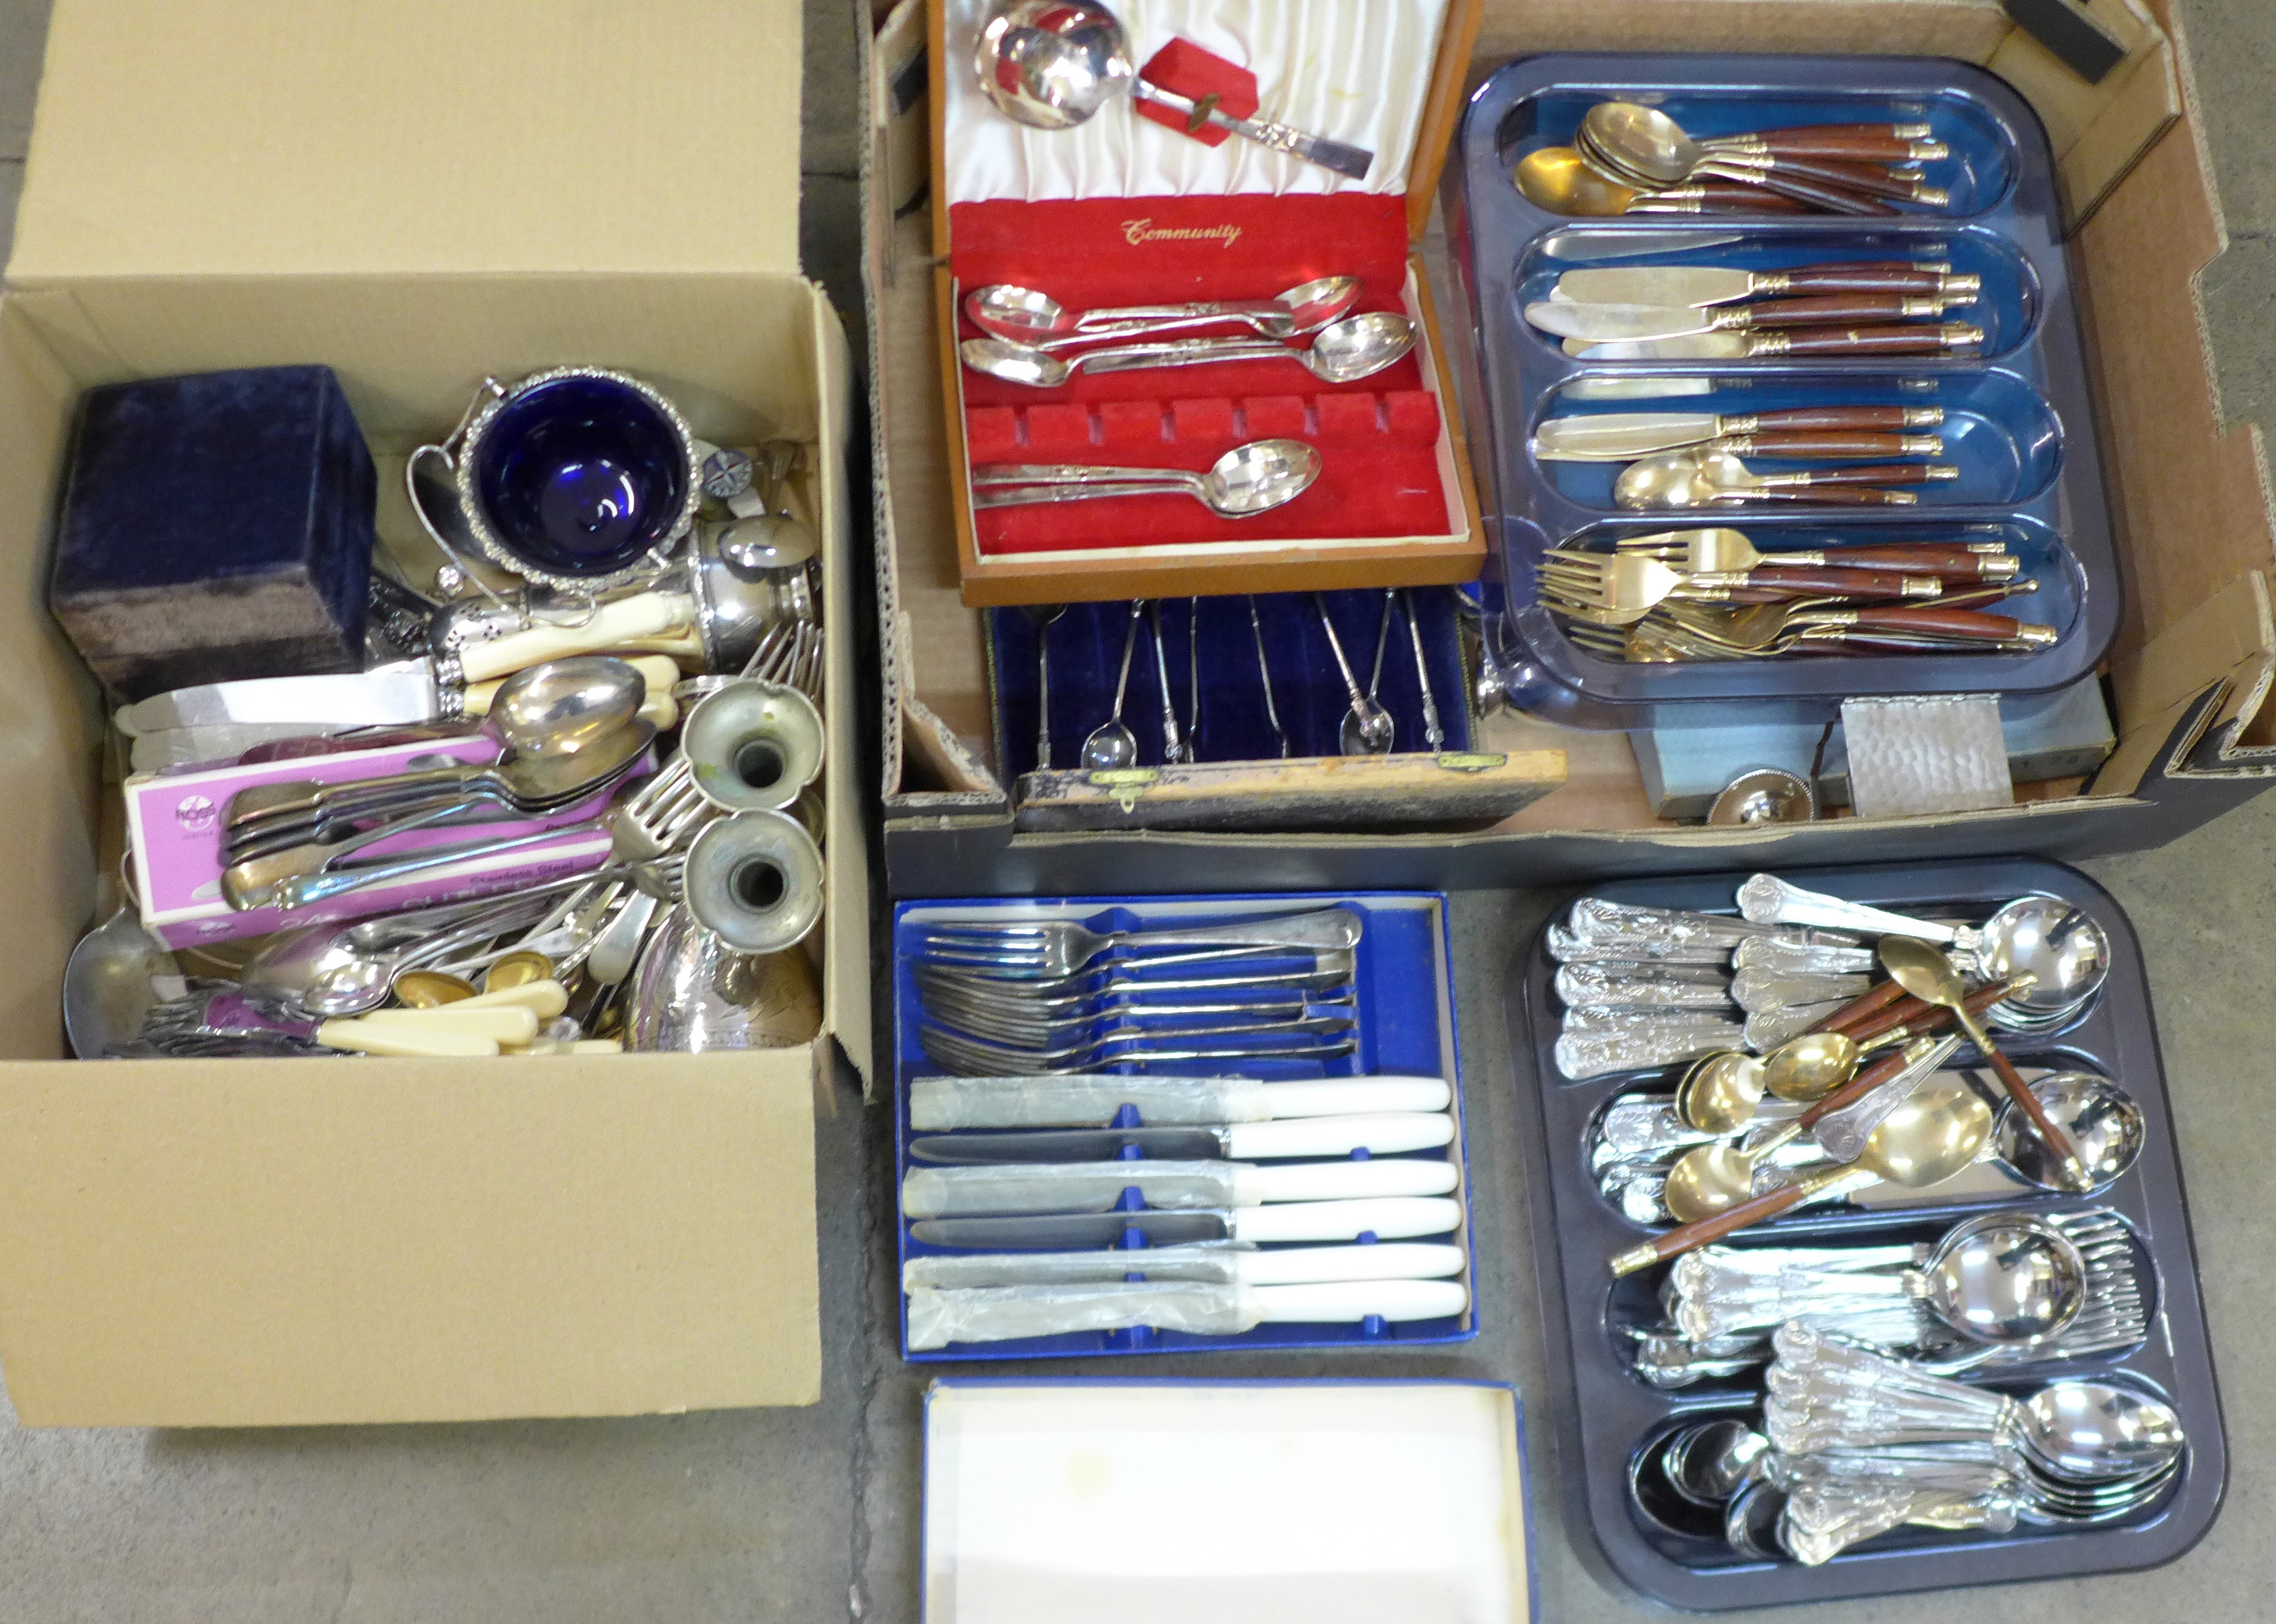 Plated and stainless steel flatware, plated goblet, and two sets of cutlery and cased cutlery sets